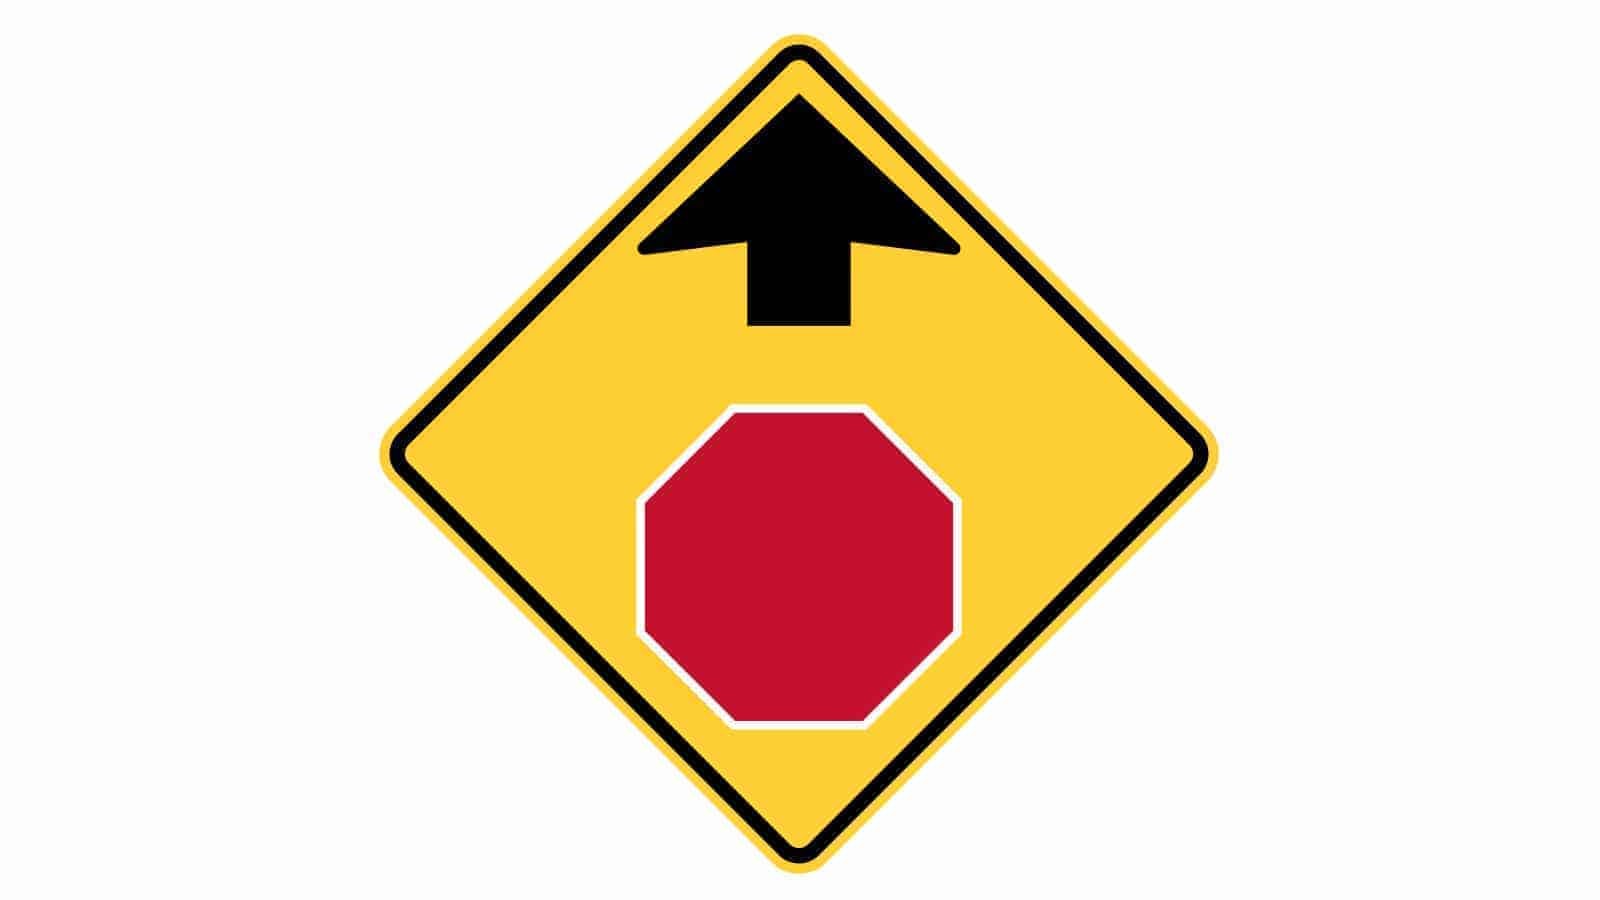 Warning sign STOP sign ahead